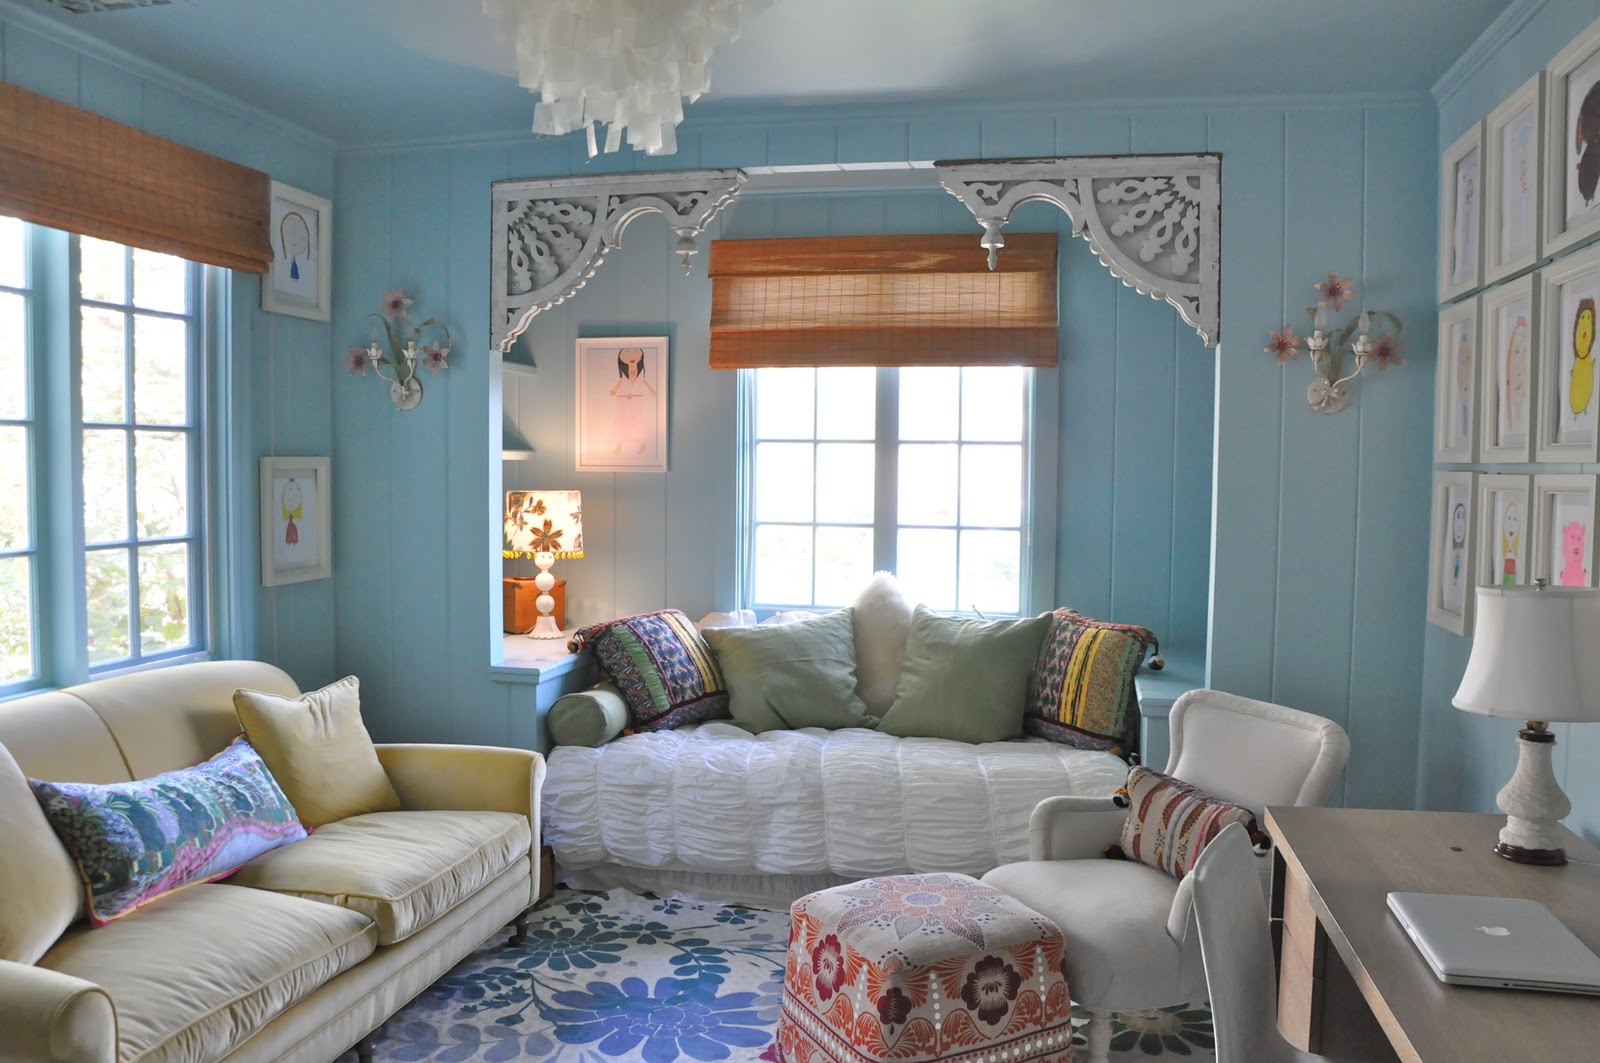 A 10  Year  Old  s Room by Giannetti Designs Via Made by 